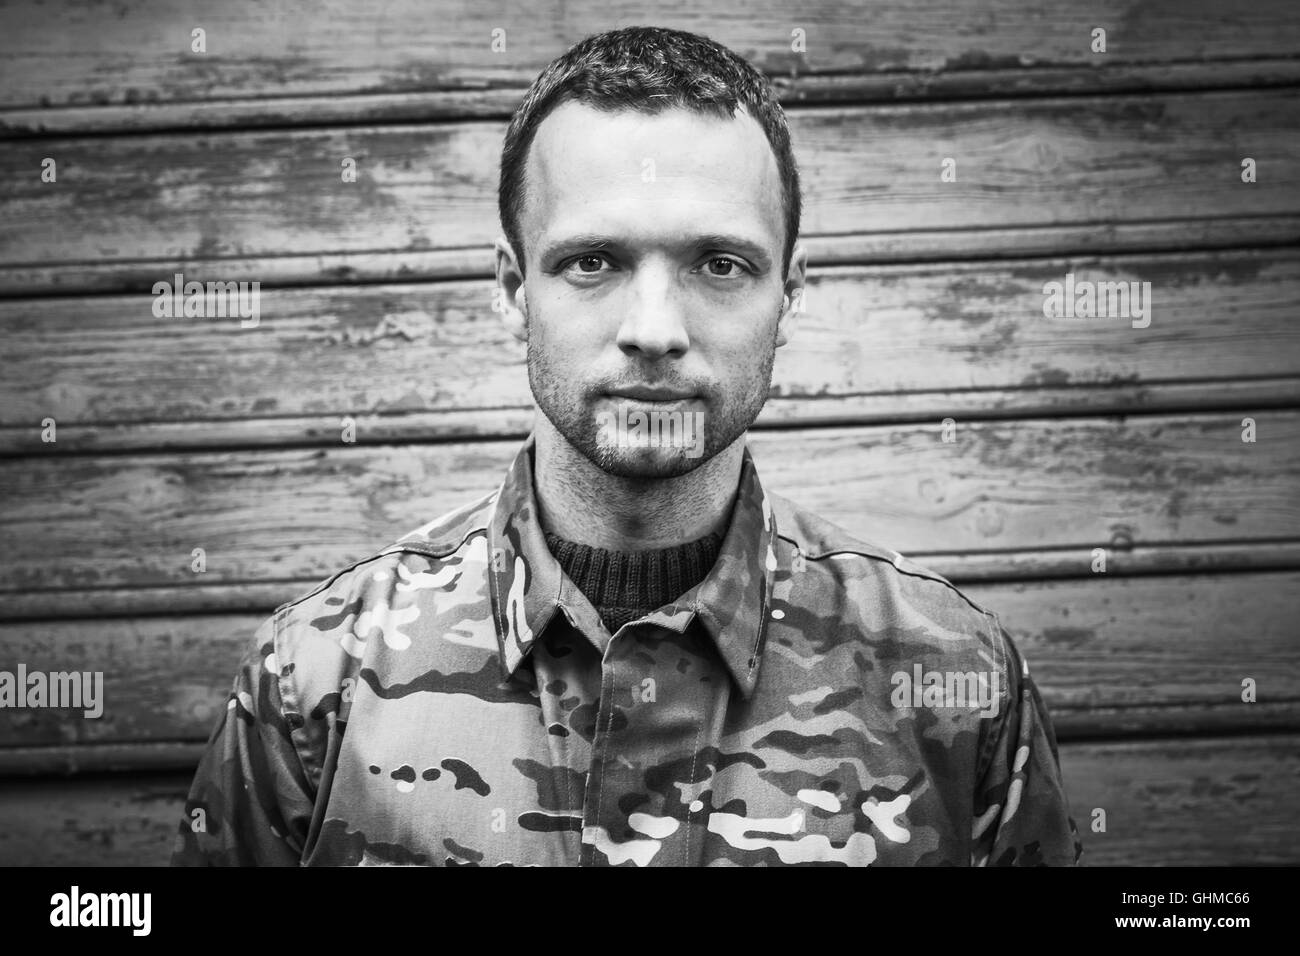 Young Caucasian military man in camouflage uniform. Closeup black and white frontal portrait over wooden wall Stock Photo